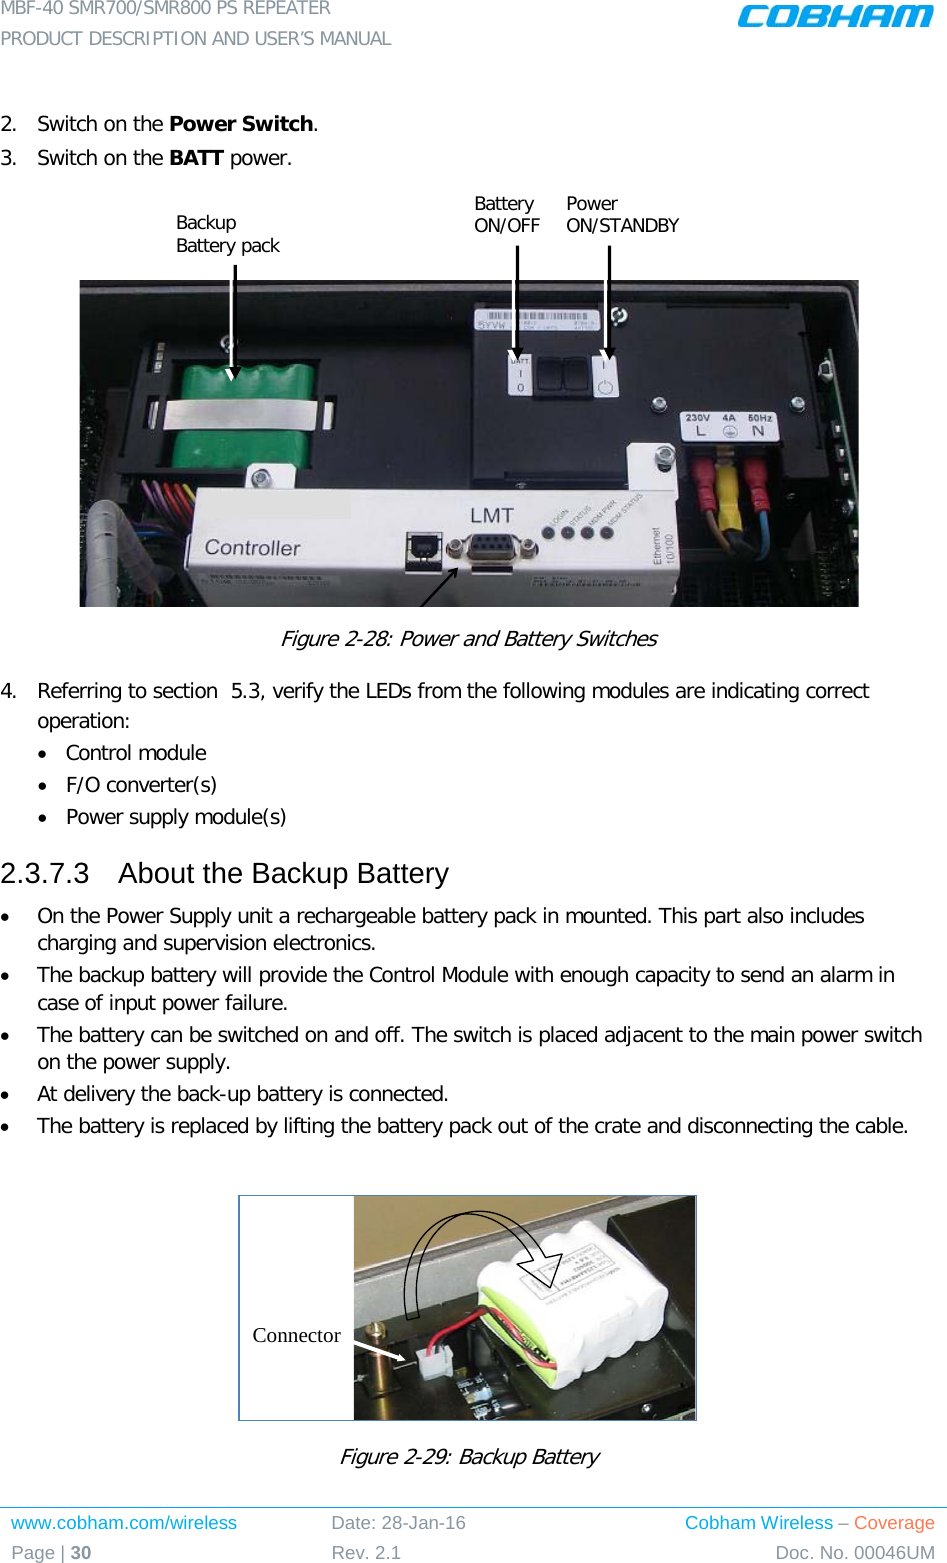 MBF-40 SMR700/SMR800 PS REPEATER  PRODUCT DESCRIPTION AND USER’S MANUAL www.cobham.com/wireless Date: 28-Jan-16 Cobham Wireless – Coverage Page | 30 Rev. 2.1 Doc. No. 00046UM   2.  Switch on the Power Switch. 3.  Switch on the BATT power.     Figure  2-28: Power and Battery Switches 4.  Referring to section   5.3, verify the LEDs from the following modules are indicating correct operation:  • Control module • F/O converter(s) • Power supply module(s) 2.3.7.3  About the Backup Battery • On the Power Supply unit a rechargeable battery pack in mounted. This part also includes charging and supervision electronics.  • The backup battery will provide the Control Module with enough capacity to send an alarm in case of input power failure.  • The battery can be switched on and off. The switch is placed adjacent to the main power switch on the power supply. • At delivery the back-up battery is connected.  • The battery is replaced by lifting the battery pack out of the crate and disconnecting the cable.   Figure  2-29: Backup Battery  ConnectorBackup Battery pack Battery ON/OFF Power ON/STANDBY 